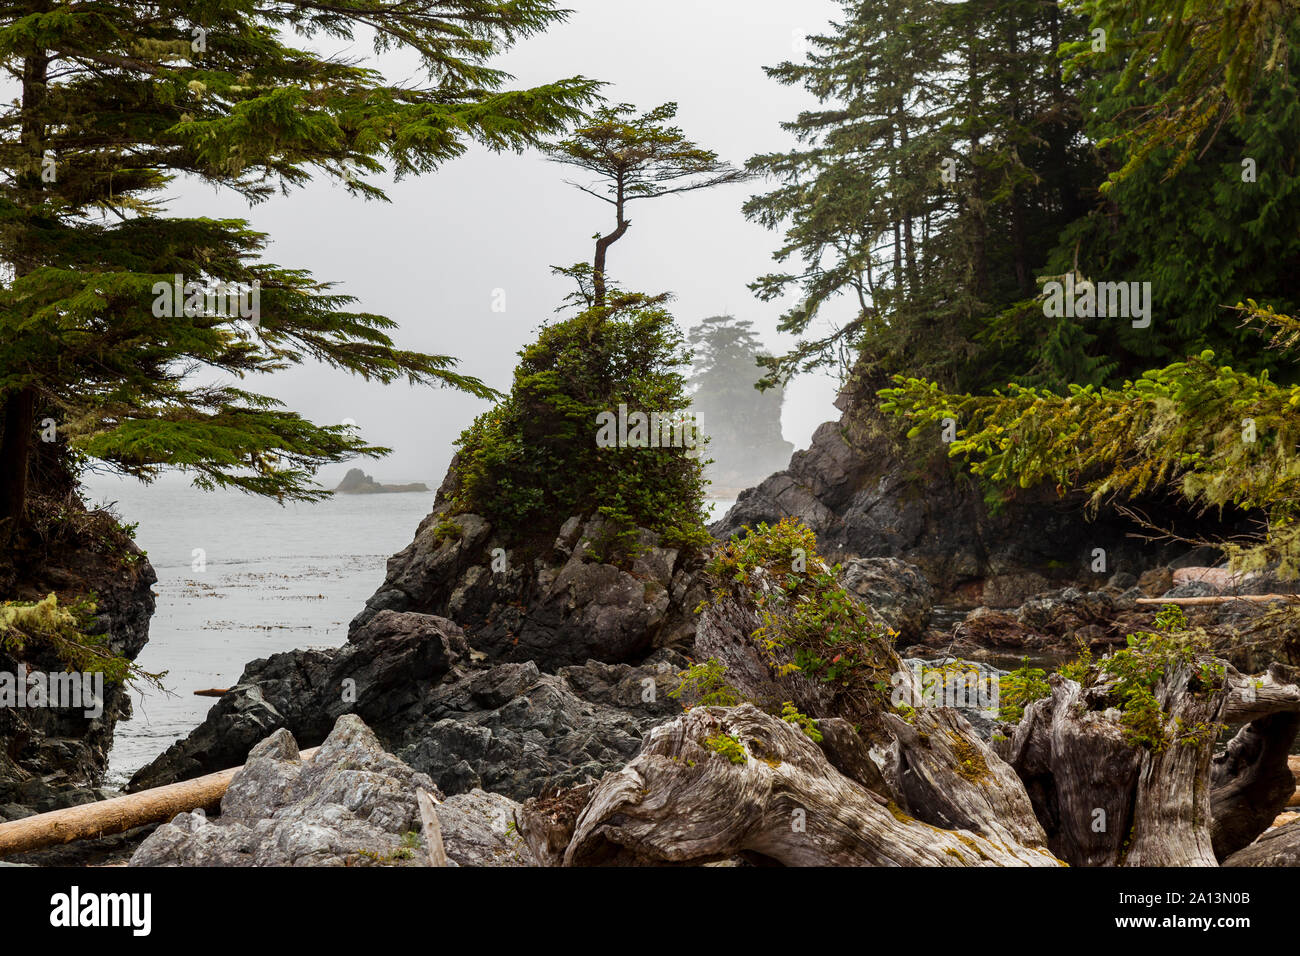 Bonsai like trees top islands in the Broken Group in Pacific Rim National Park Reserve, British Columbia, Canada Stock Photo